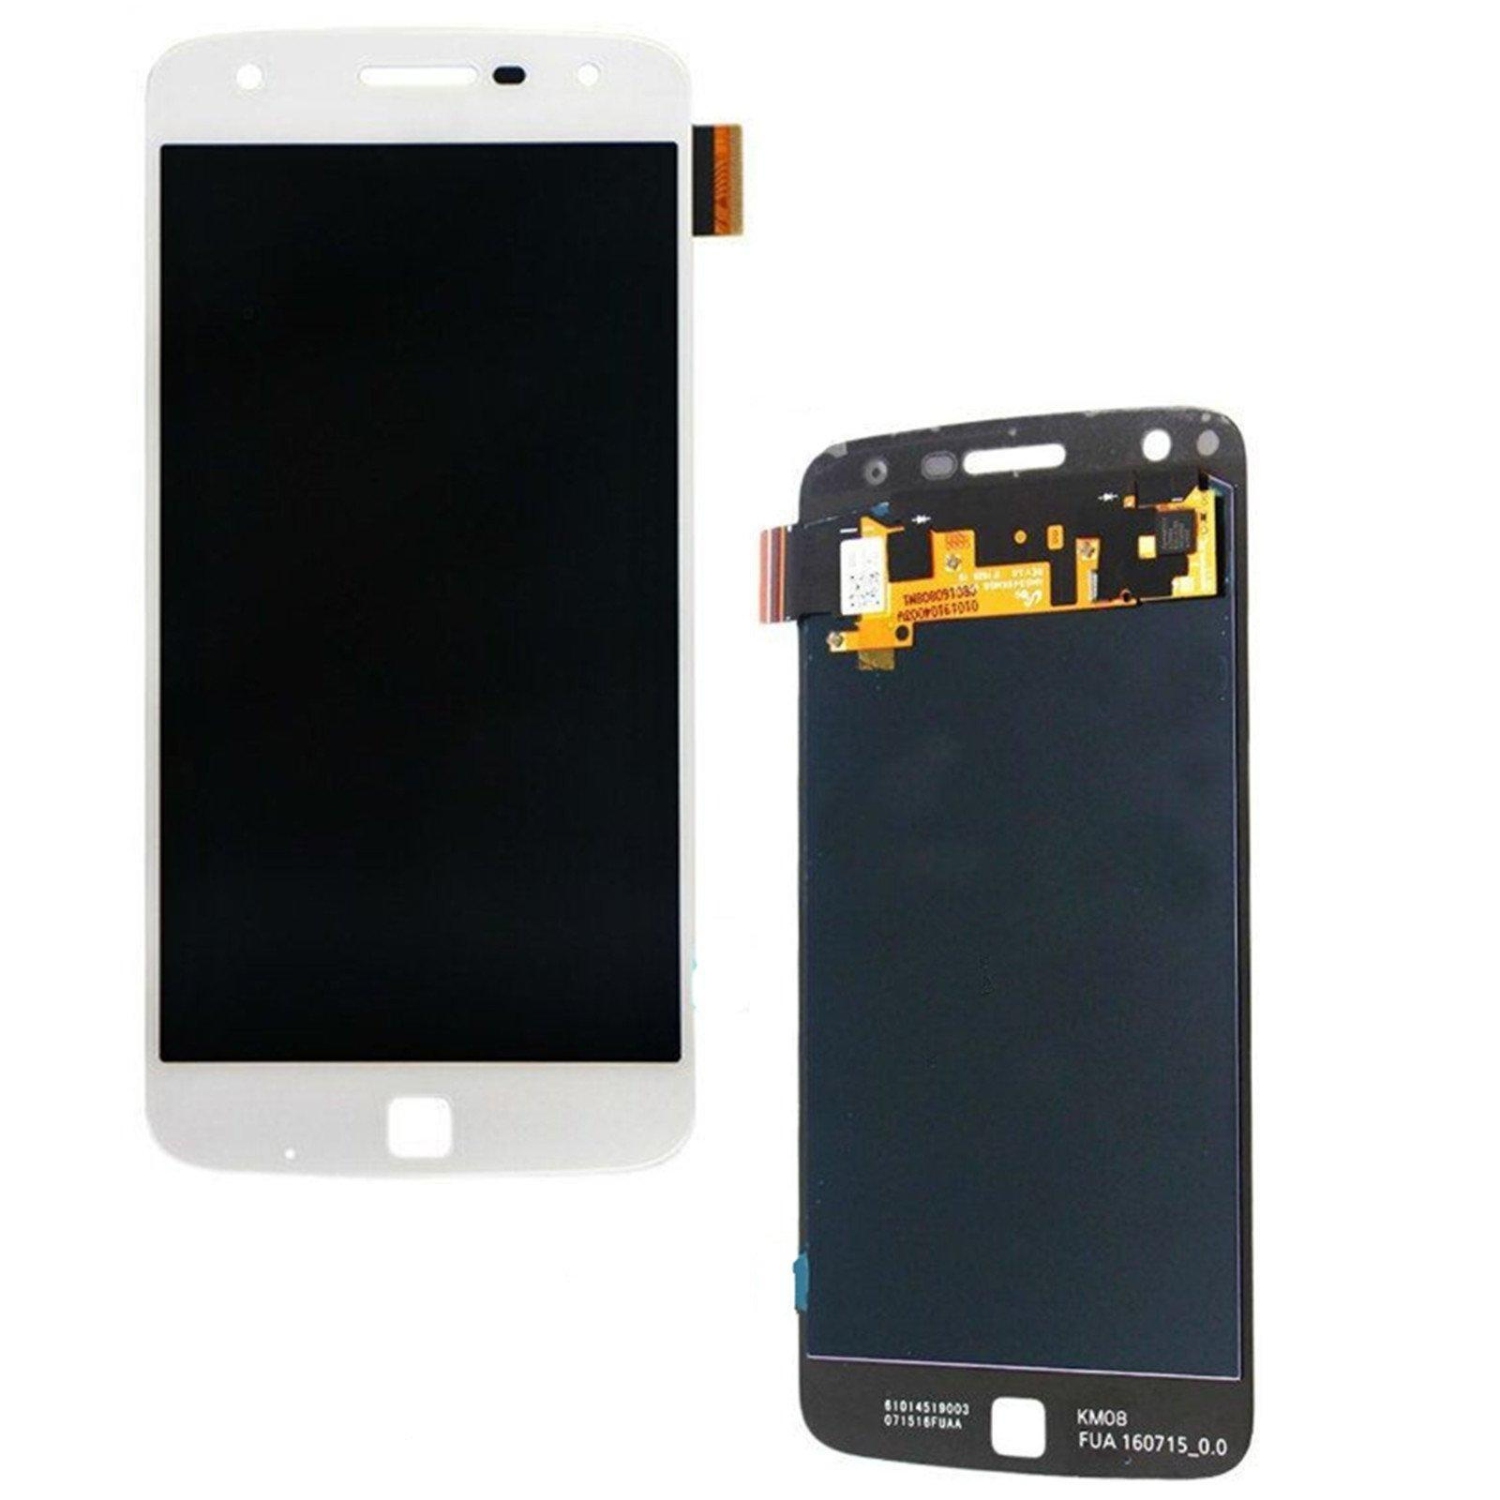 Motorola Moto Z Play XT1635 LCD Screen and Digitizer Touch Screen Assembly Replacement - White